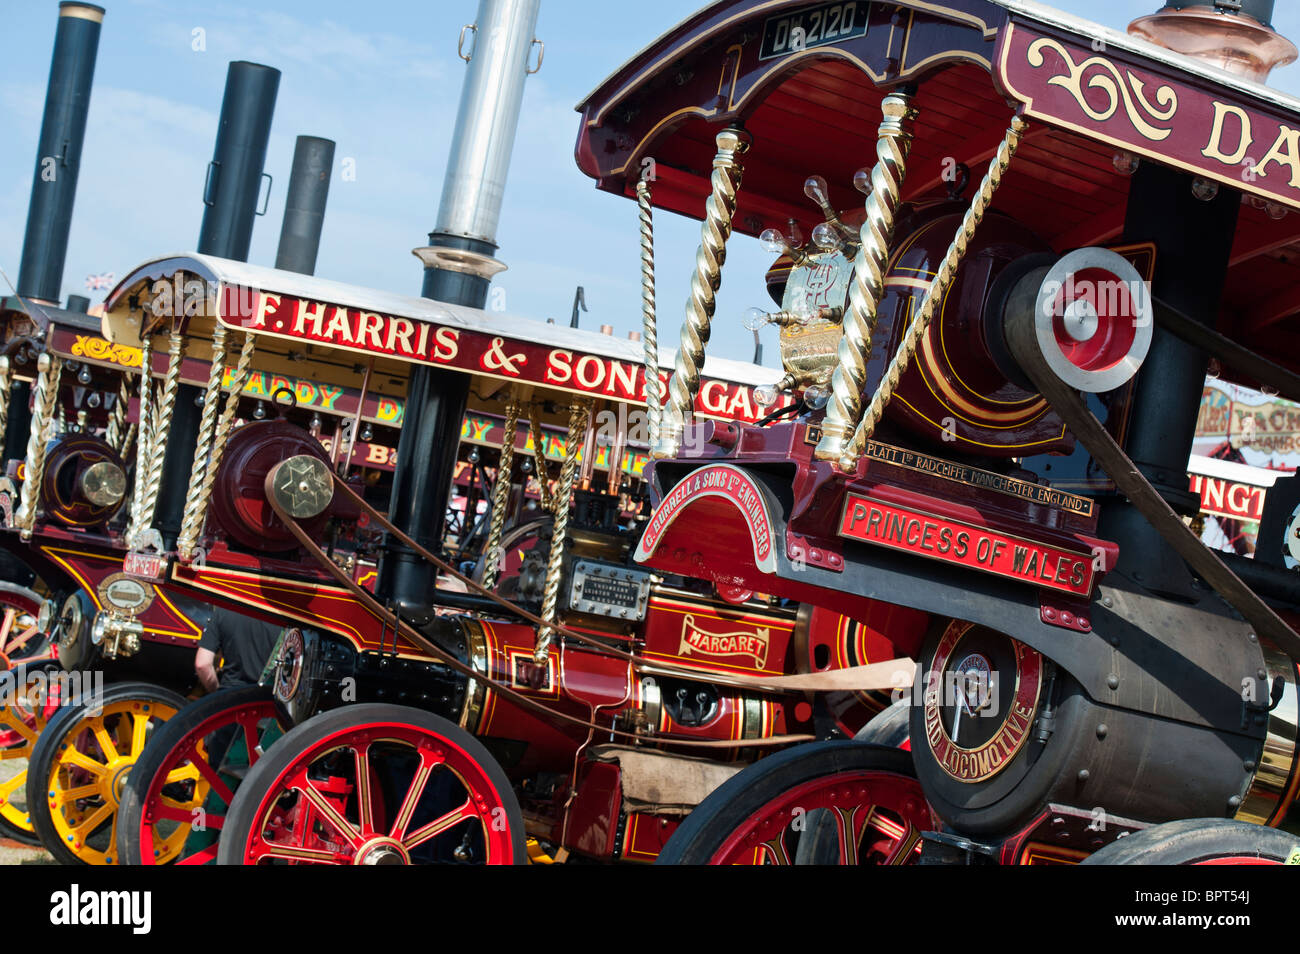 Showmans Traction Engines at the Great Dorset steam fair 2010, England Stock Photo